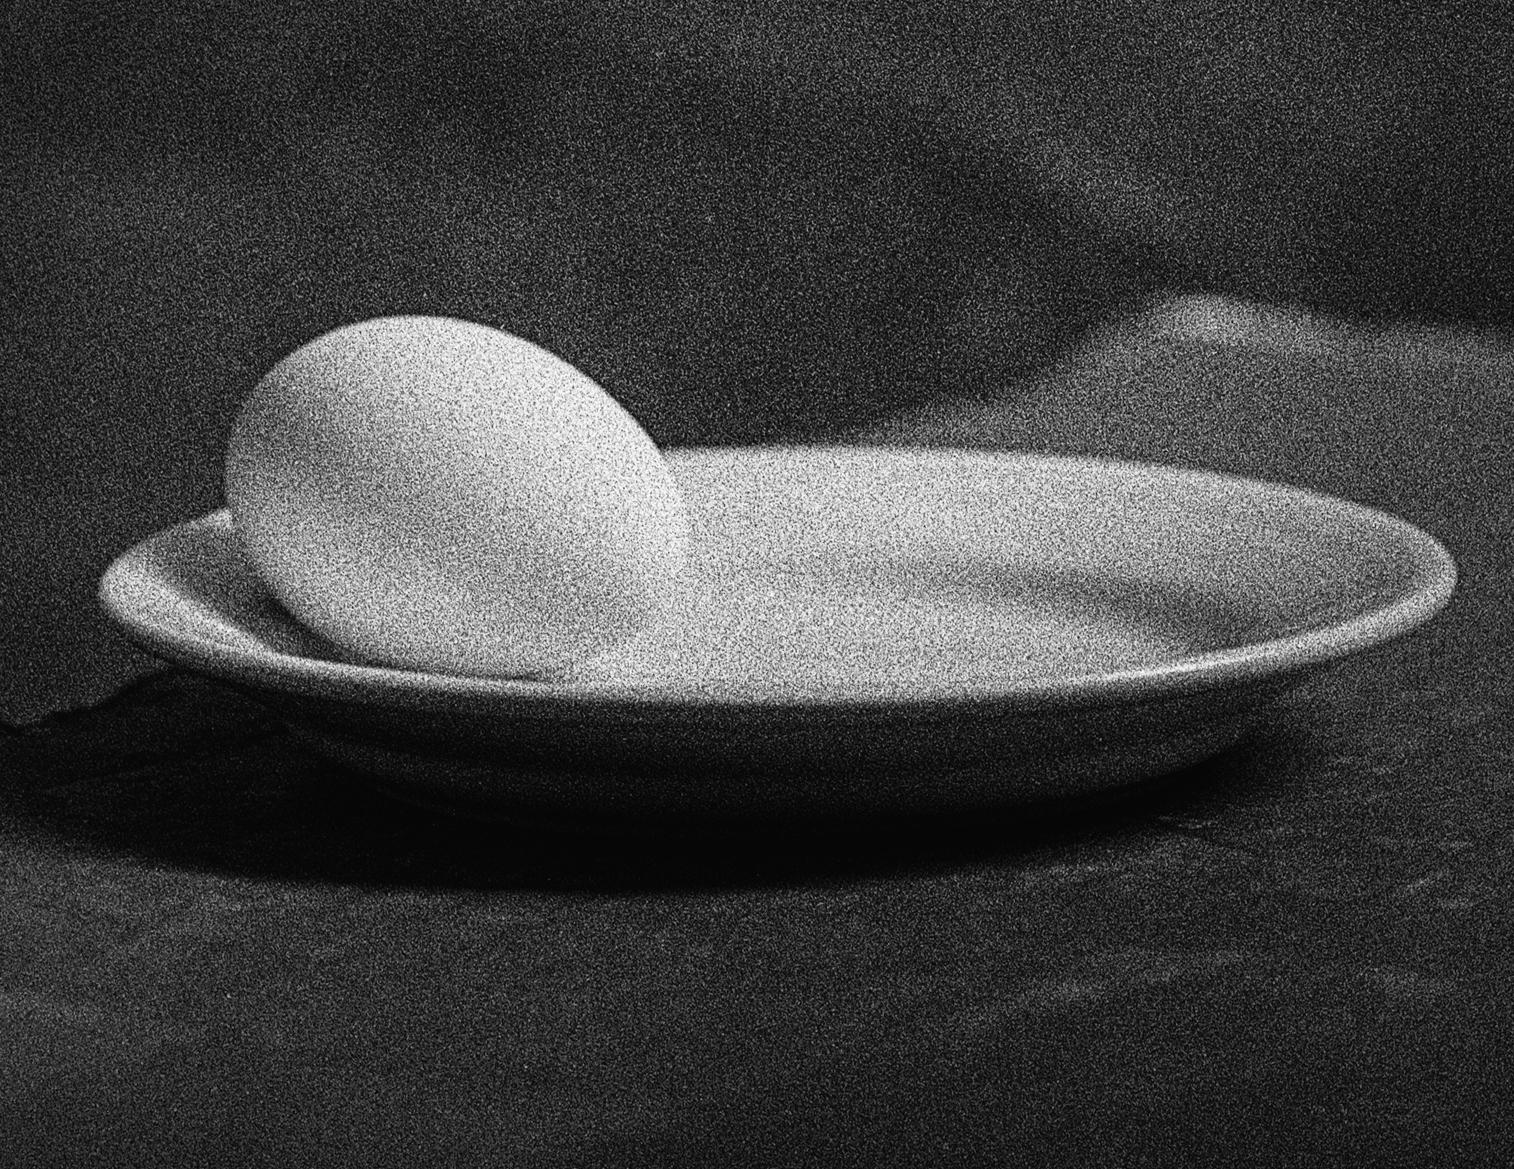 Egg Study 4.  Still Life . Black and White Silver Gelatin Print - Photograph by Shine Huang